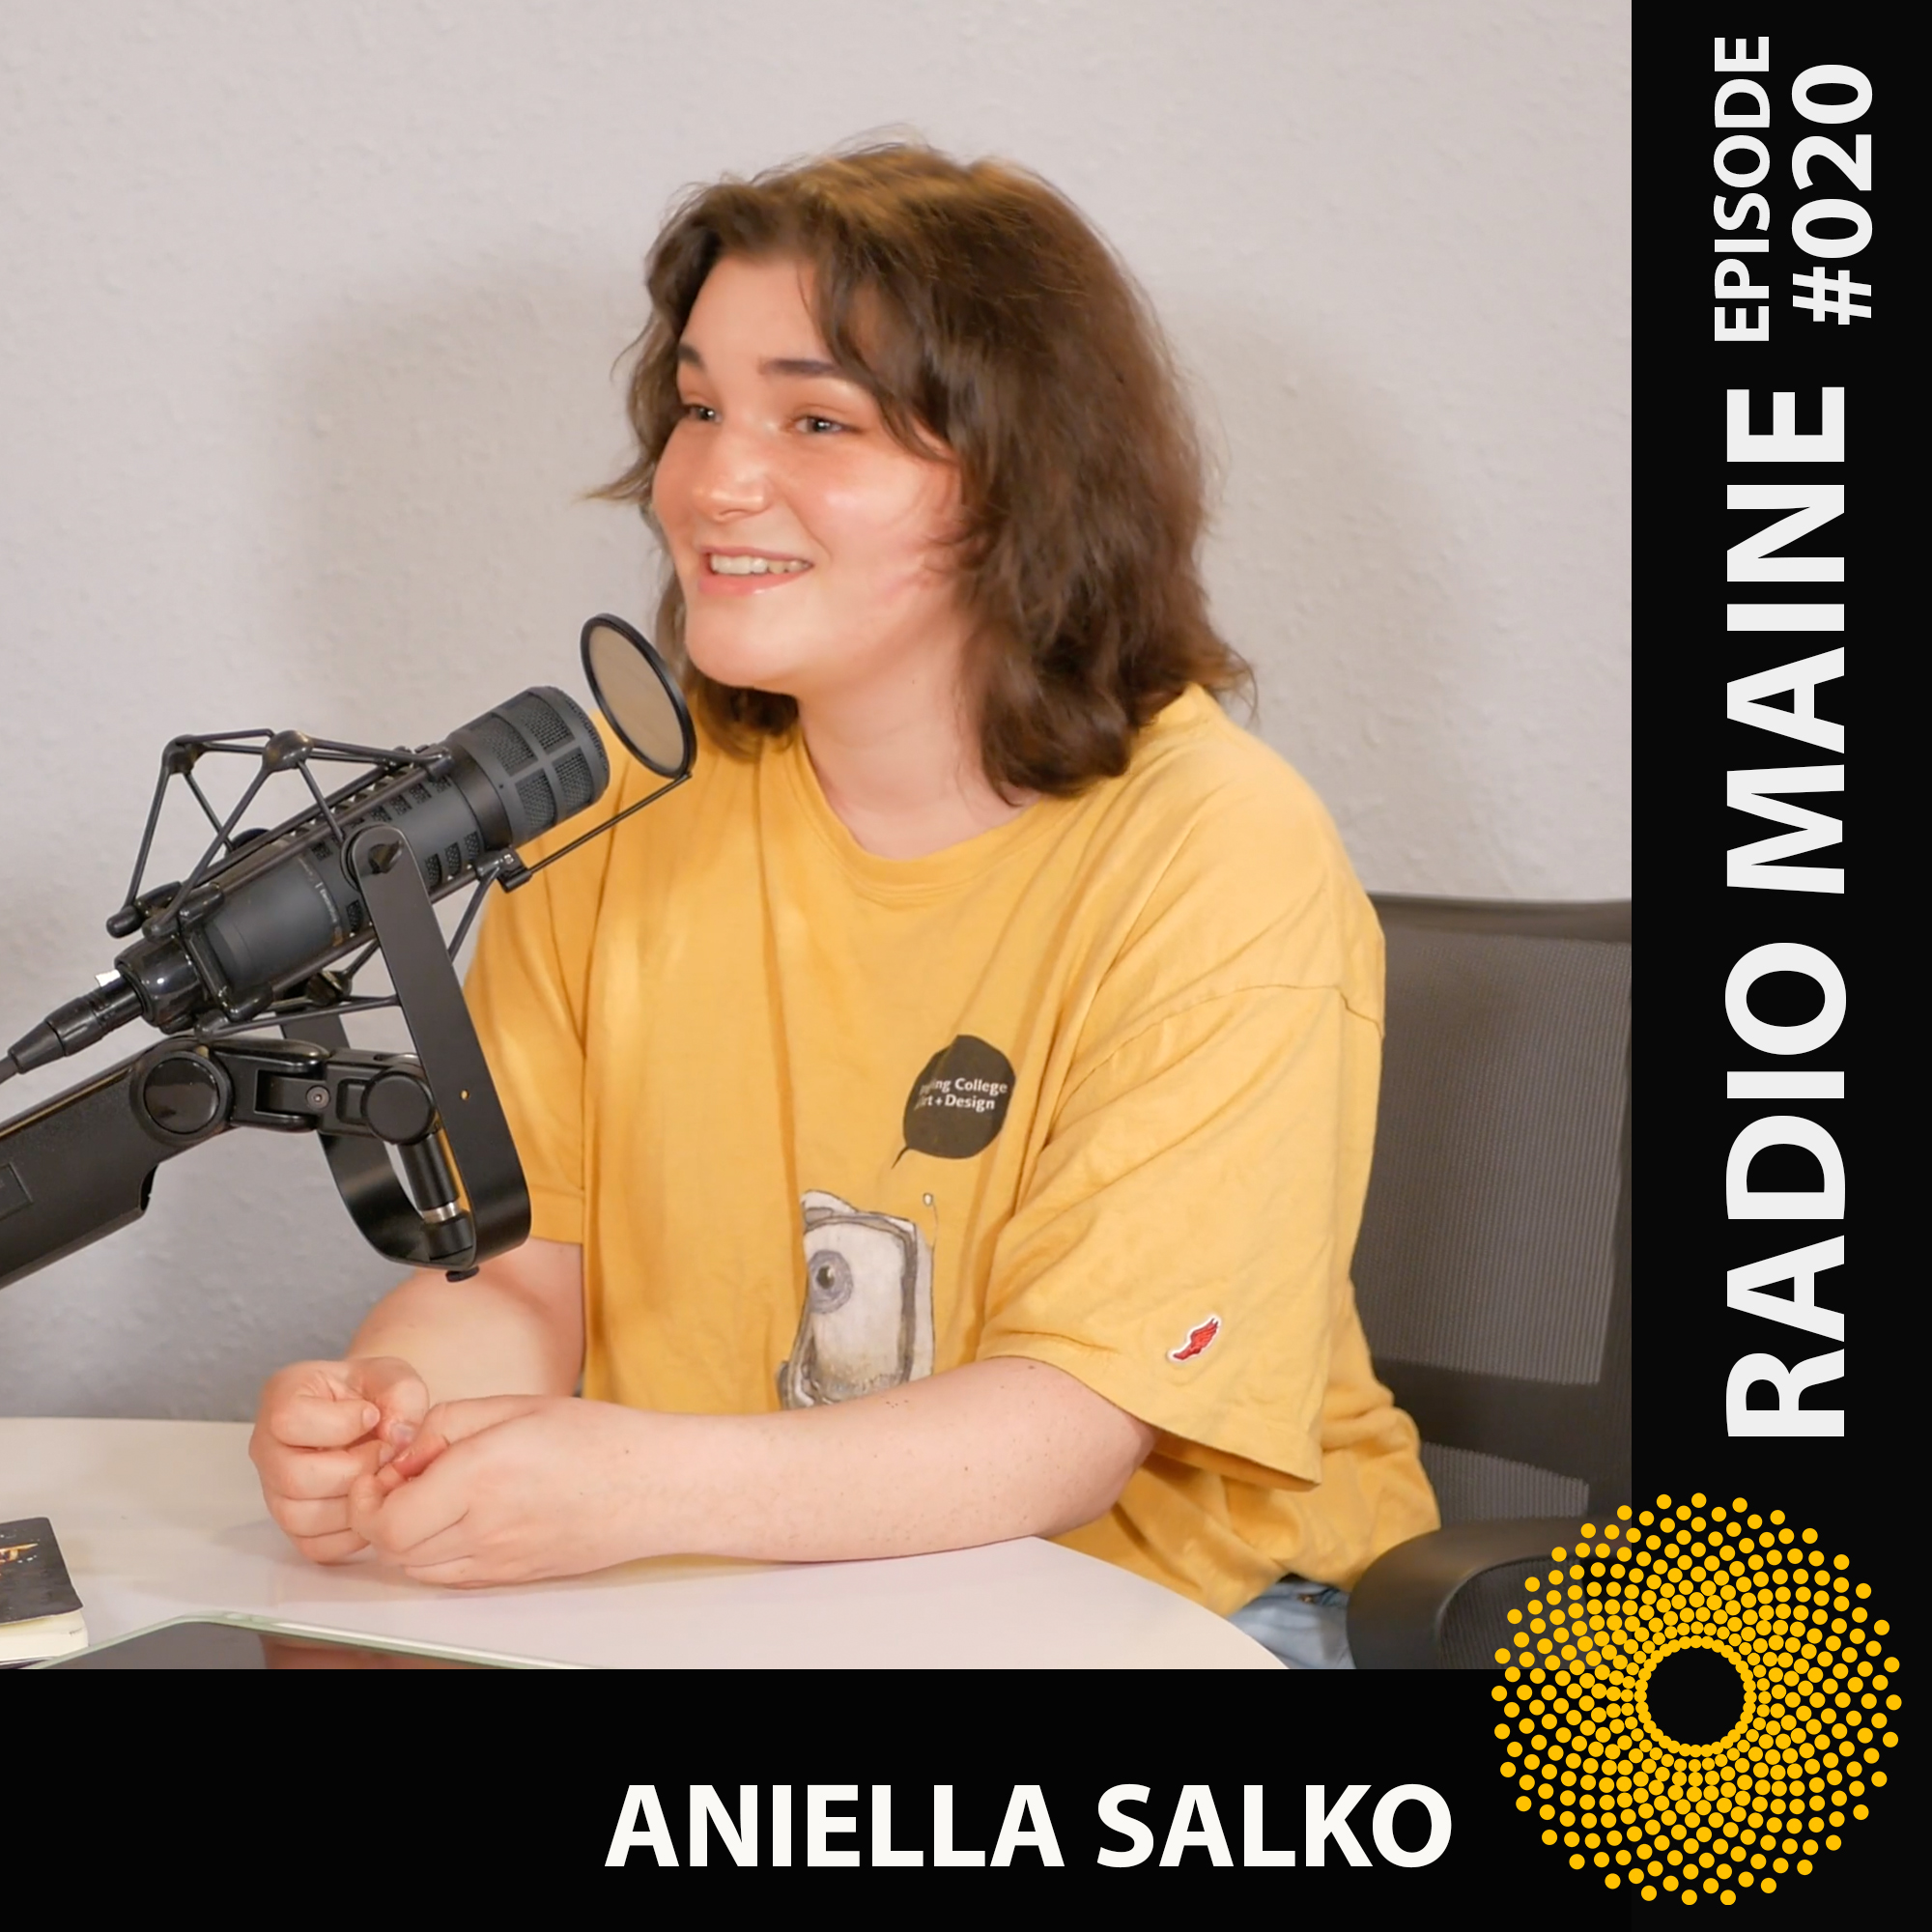 RIngling student Aniella Salko being interviewed on Radio Maine with Dr. Lisa Belisle